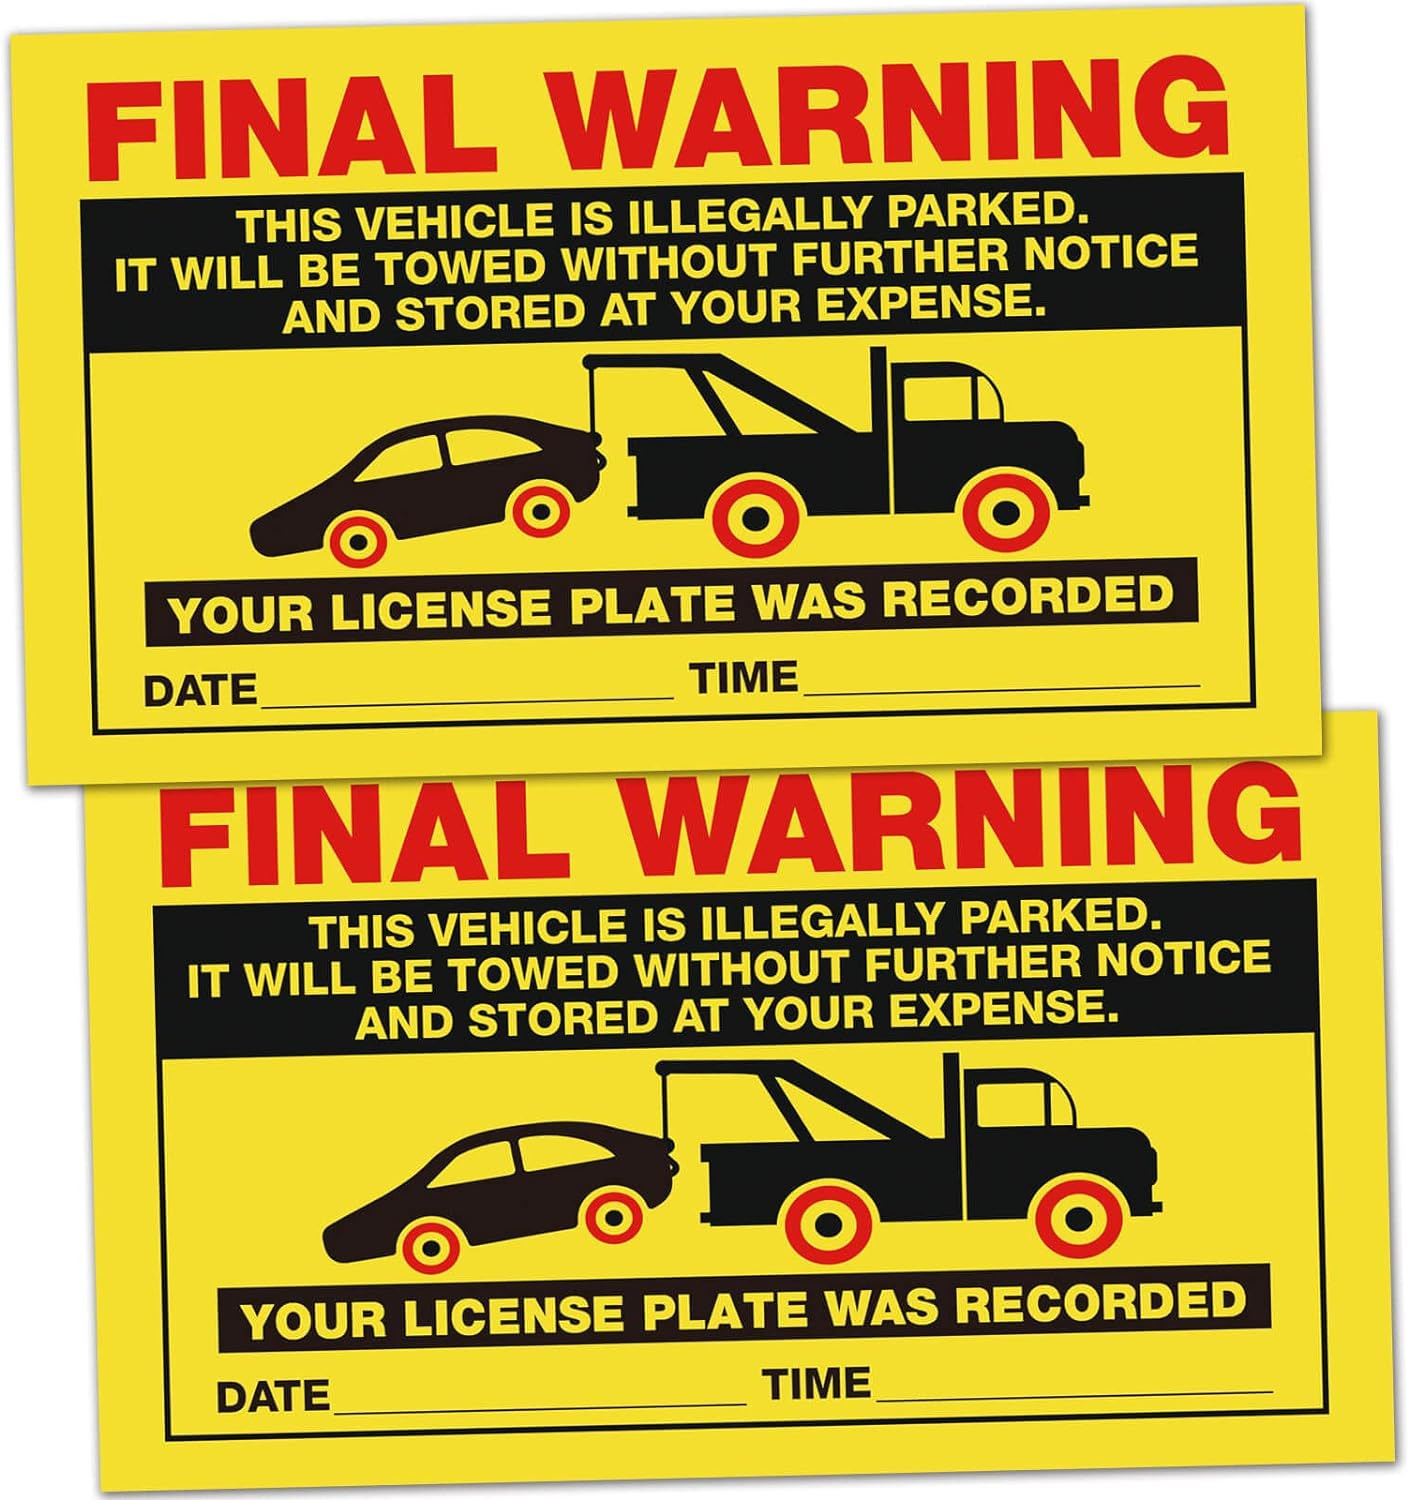 50 Final Warning Stickers, Parking Violation Notice Vehicle Is Illegally Parked 